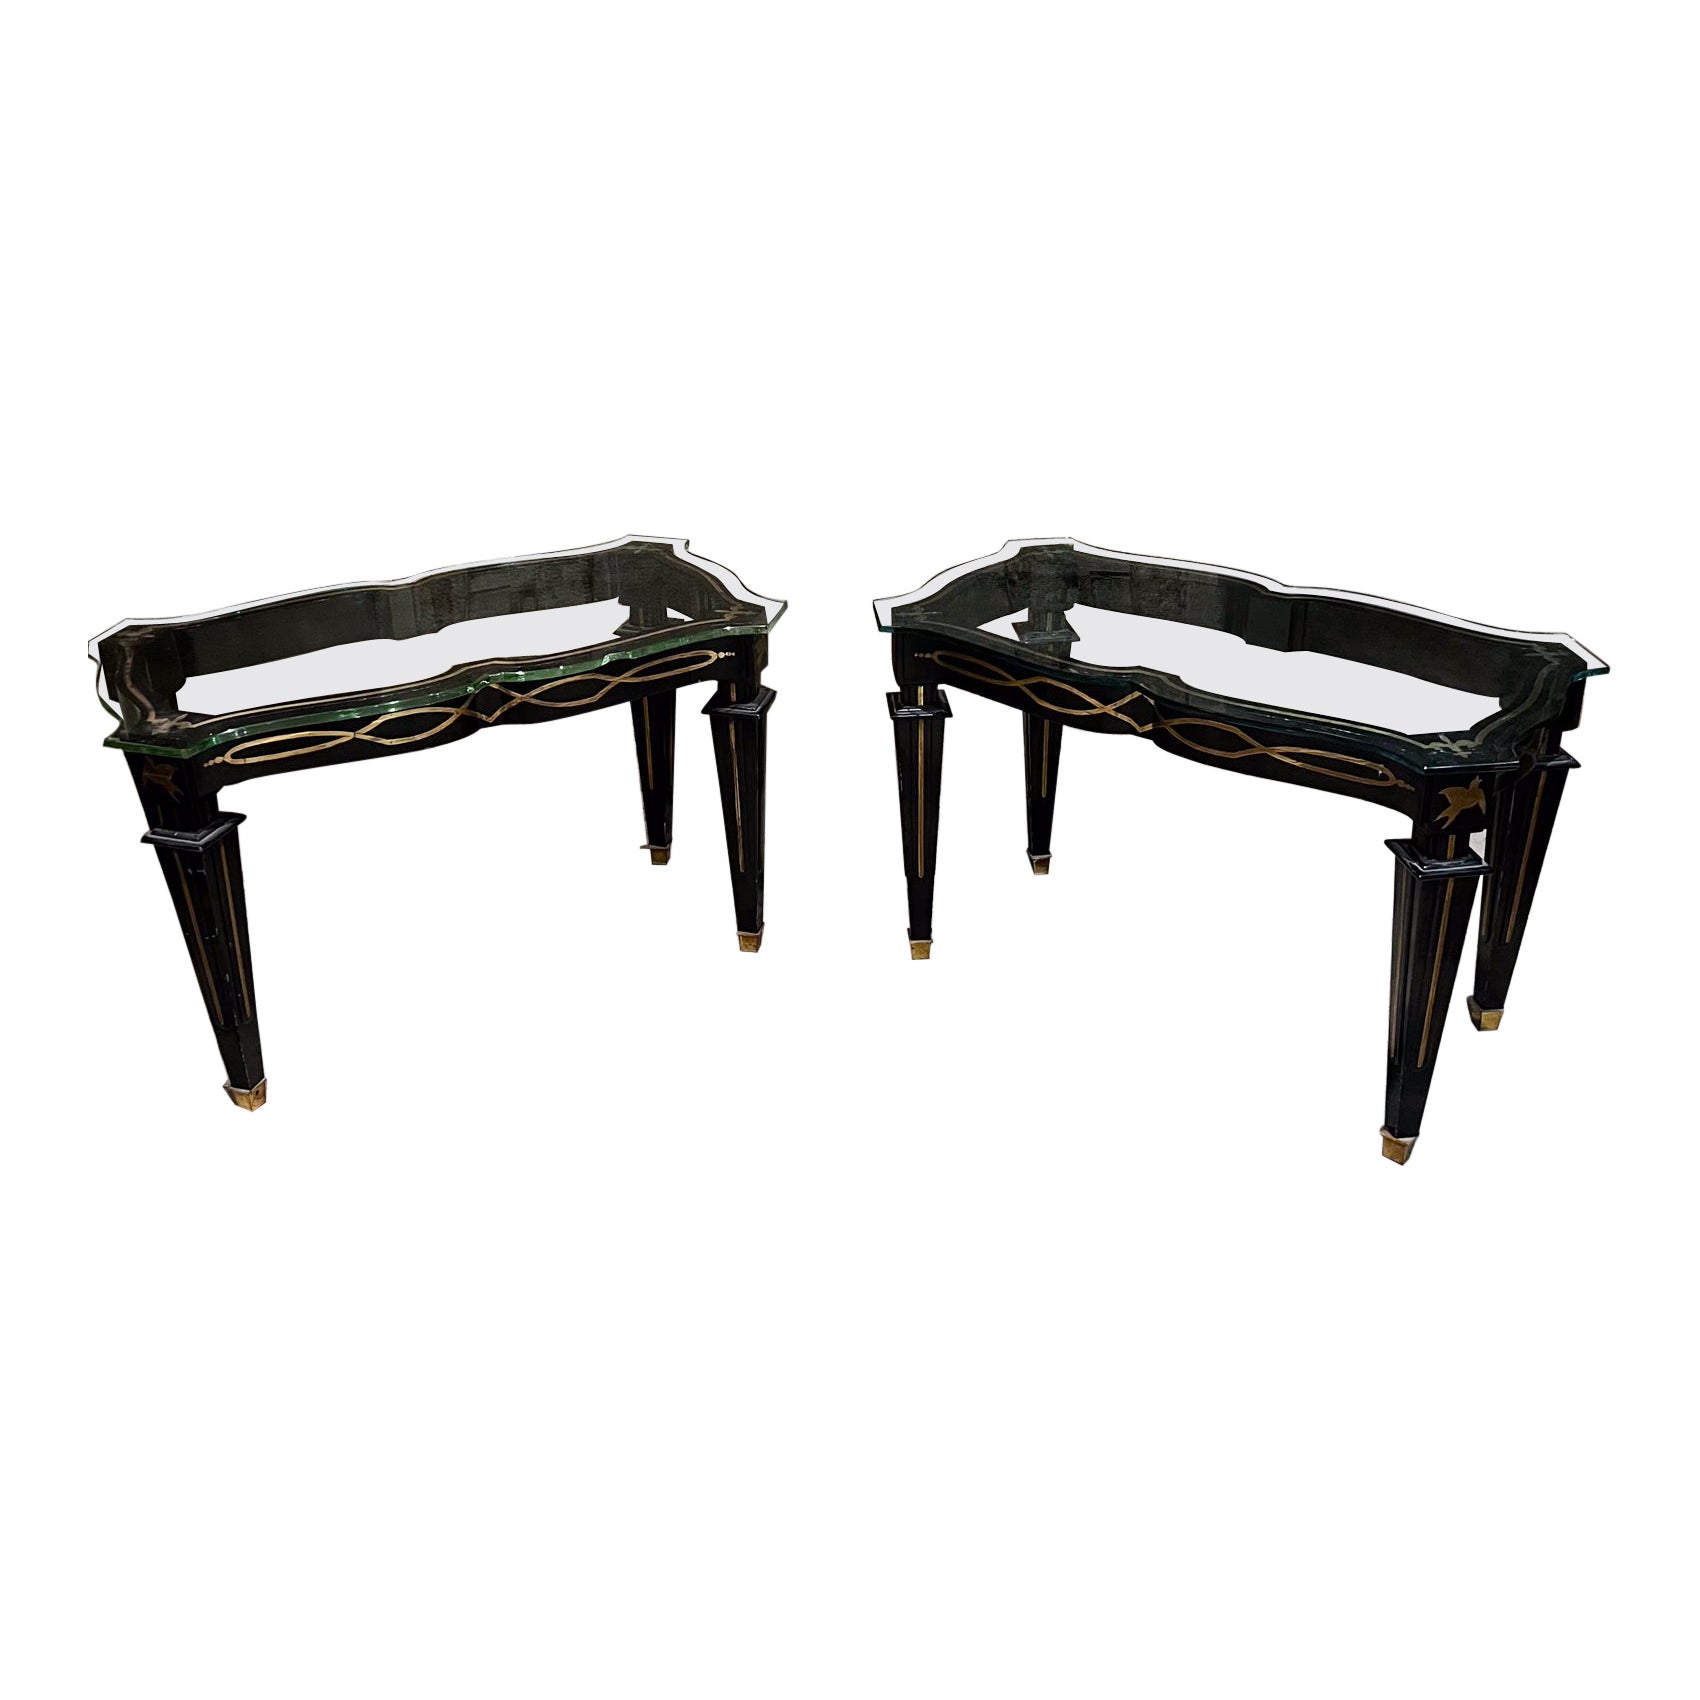 circa 1940s Neoclassical Fleur de Lis Side Table Arturo Pani Modernism Mexico City
Two tables are available: price per table $2750.
Solid Mahogany wood finished in high gloss black lacquer, brass ornamentation dove & fleur de lis.
Sabots in solid